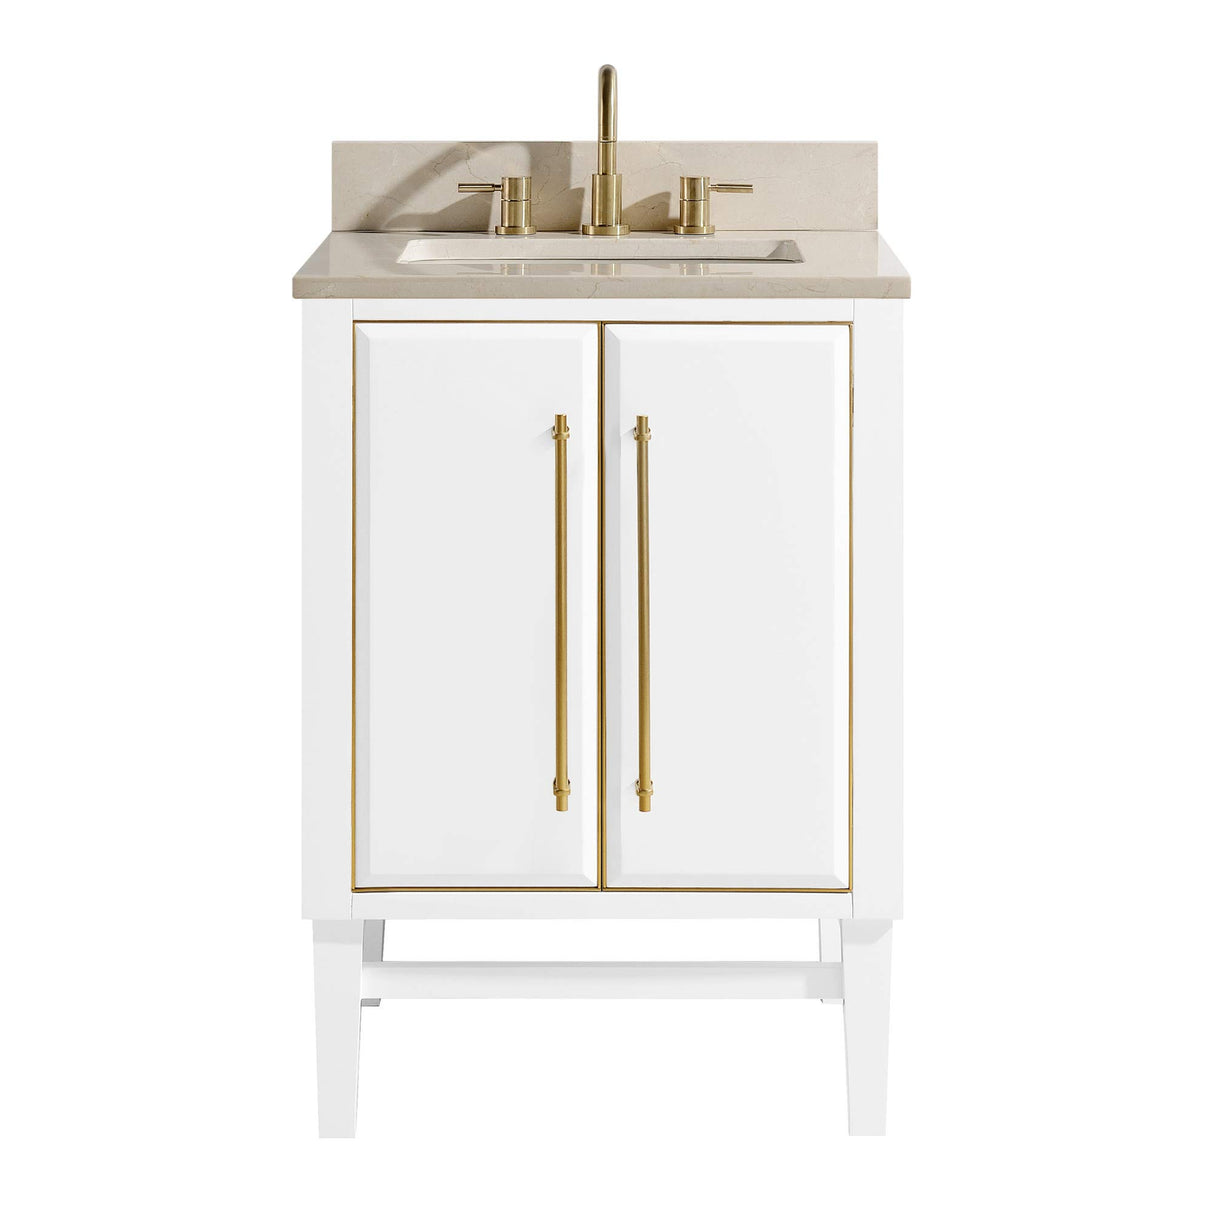 Avanity Mason 25 in. Vanity Combo in White with Gold Trim and Crema Marfil Marble Top